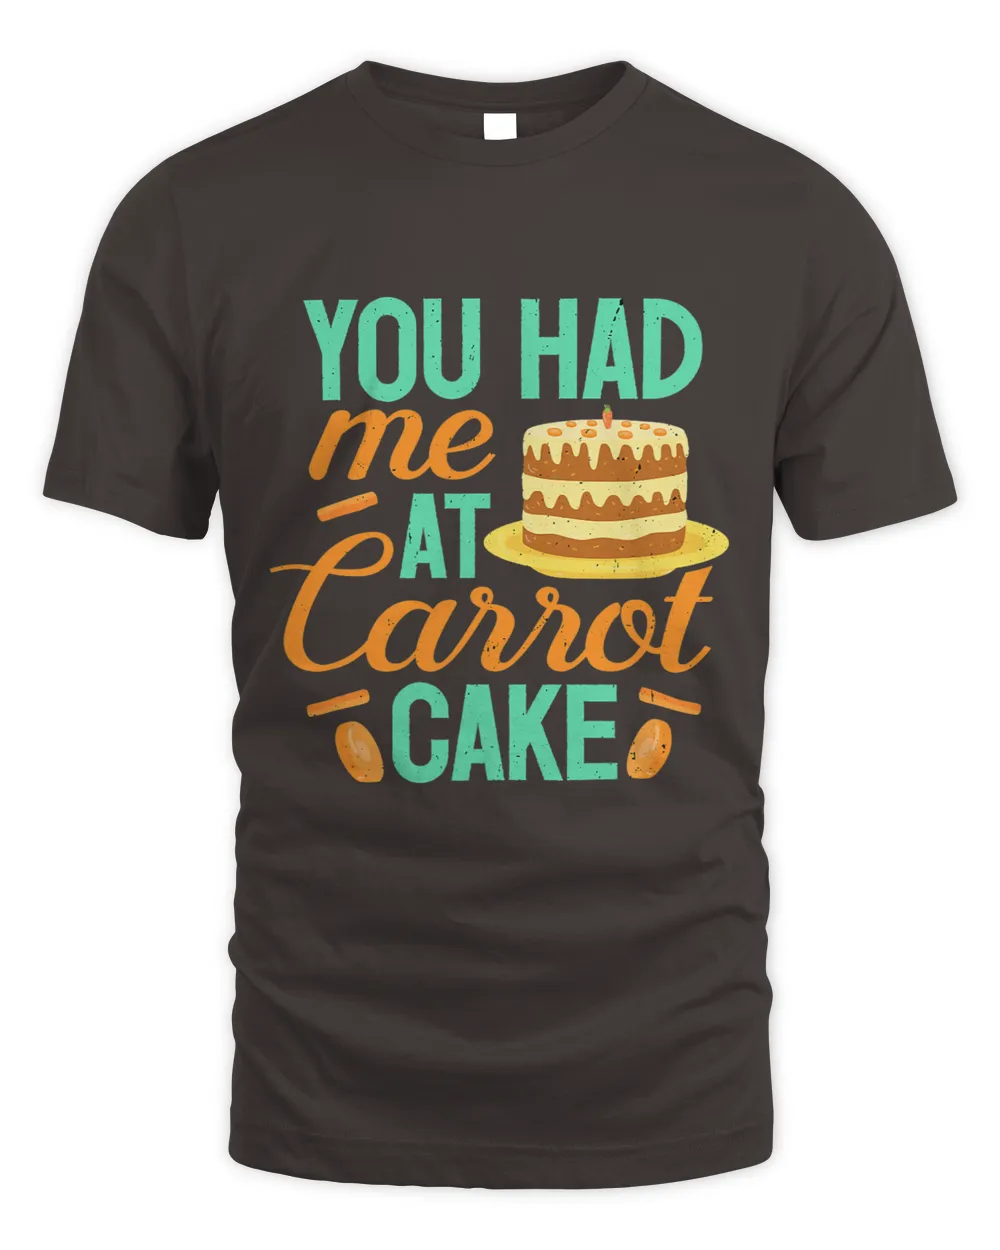 Carrot Cake You Had Me Funny Baker Baking Lover Pastry Chef